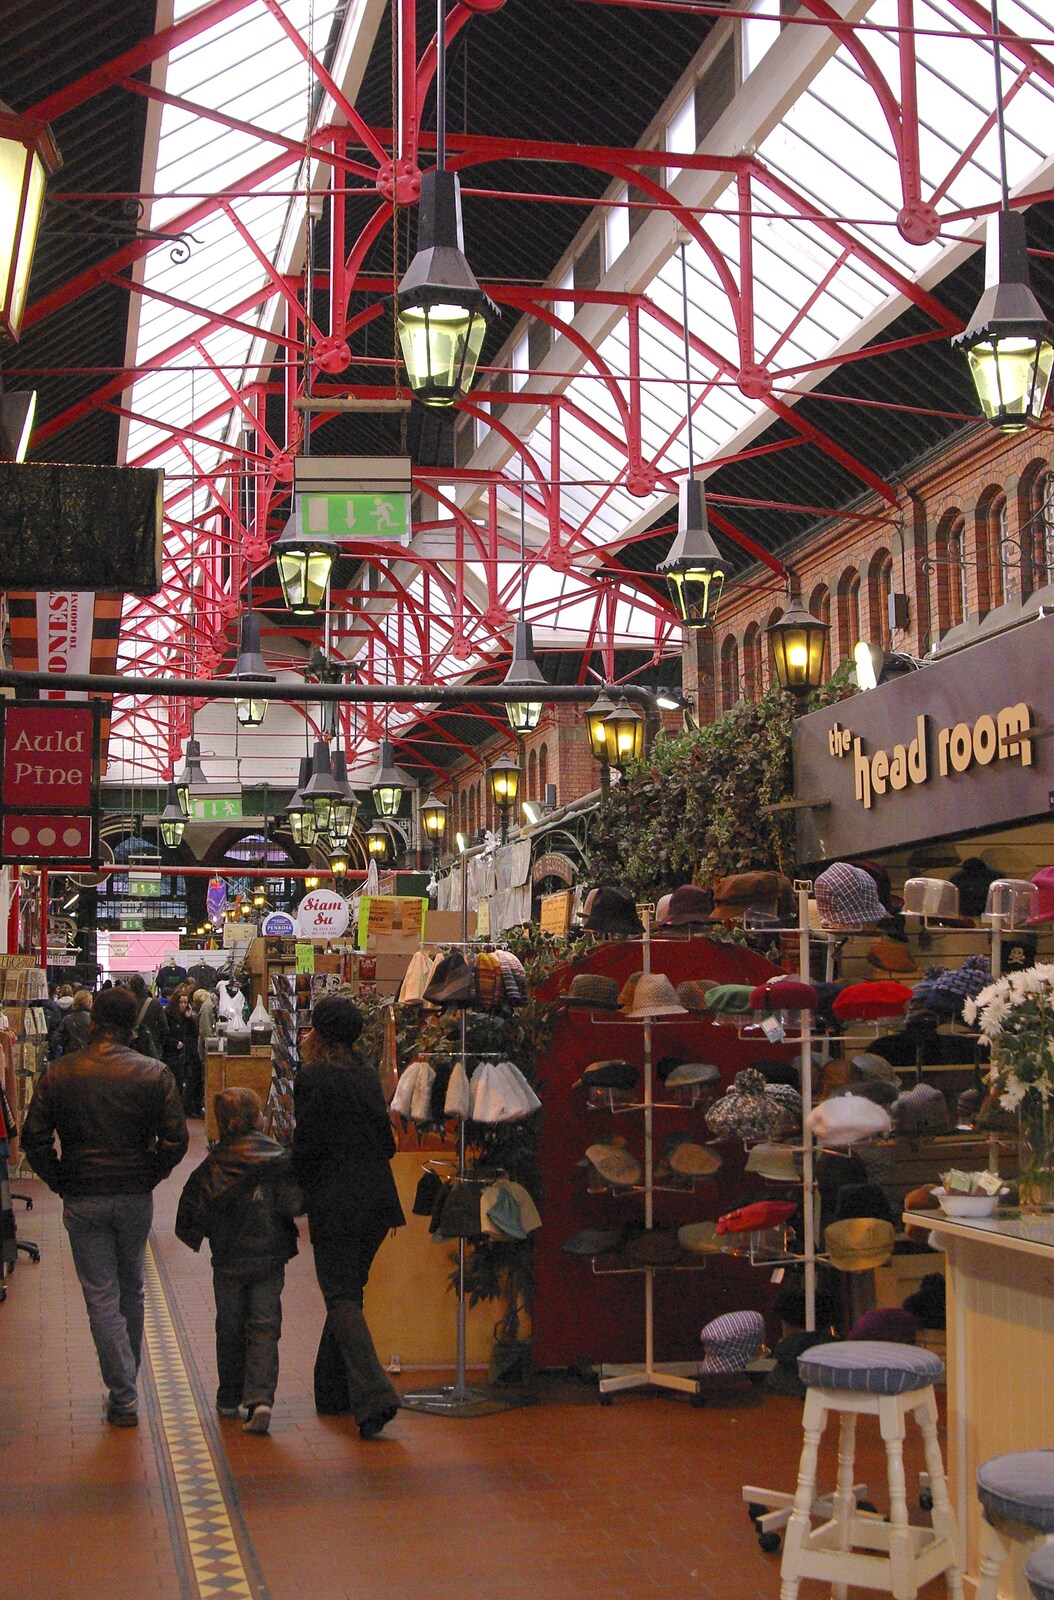 More of the indoor market from Easter in Dublin, Ireland - 21st March 2008